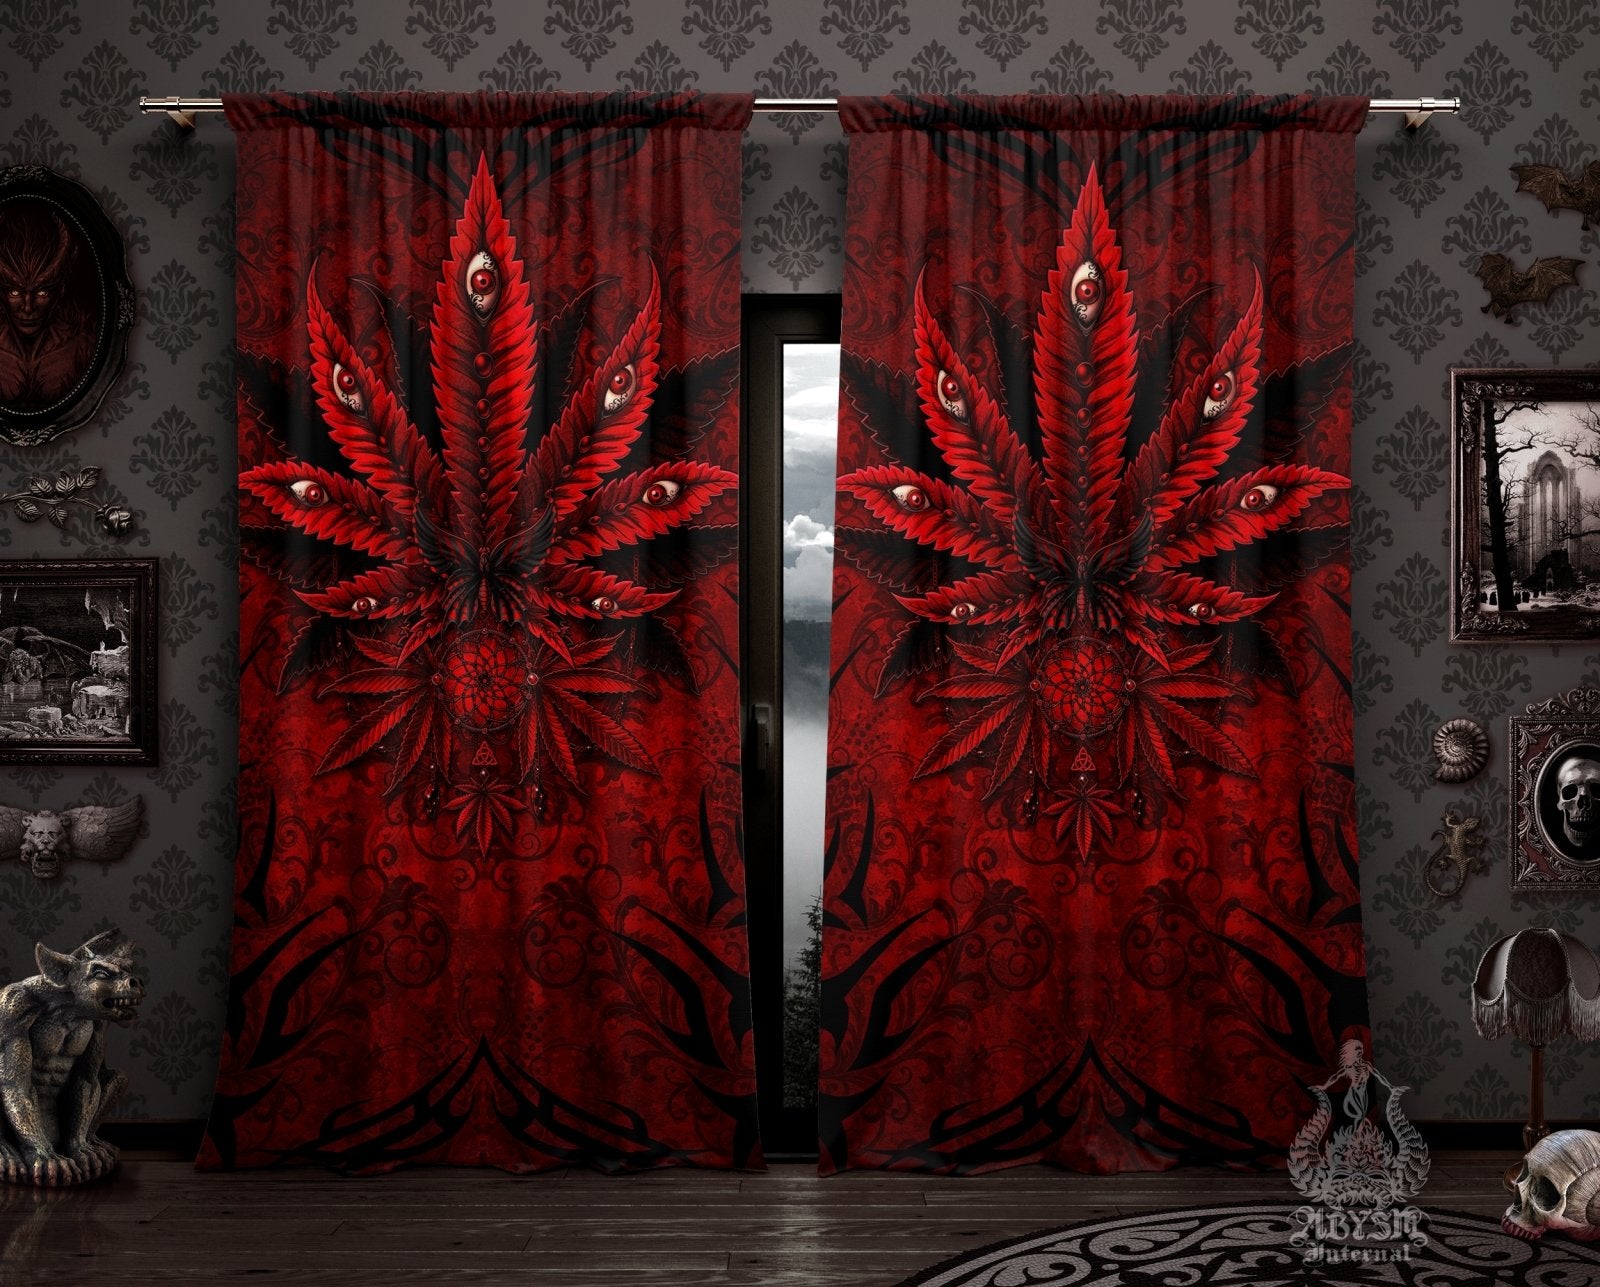 Gothic Weed Blackout Curtains, Cannabis Home and Shop Decor, Long Window Panels, Indie 420 Room Art Print - Bloody Goth - Abysm Internal